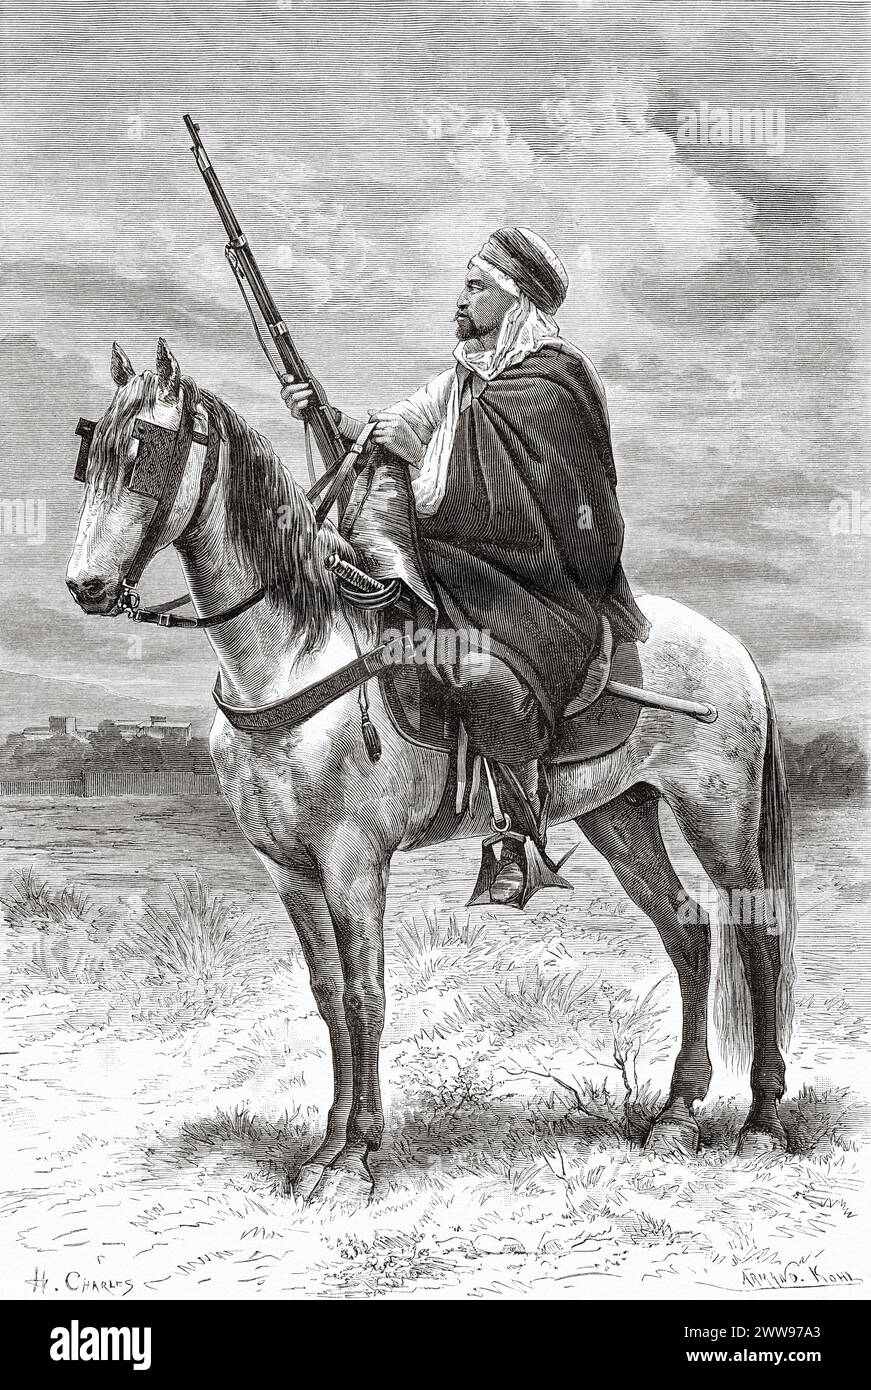 Spahi, were light-cavalry regiments of the French army recruited primarily from the Arab and Berber populations of Algeria, Tebessa. Oran Province, Algeria. Africa. Drawing by H. Charles, Tébessa and its monuments by Antoine Héron de Villefosse (1845 - 1919) Le Tour du Monde 1880 Stock Photo